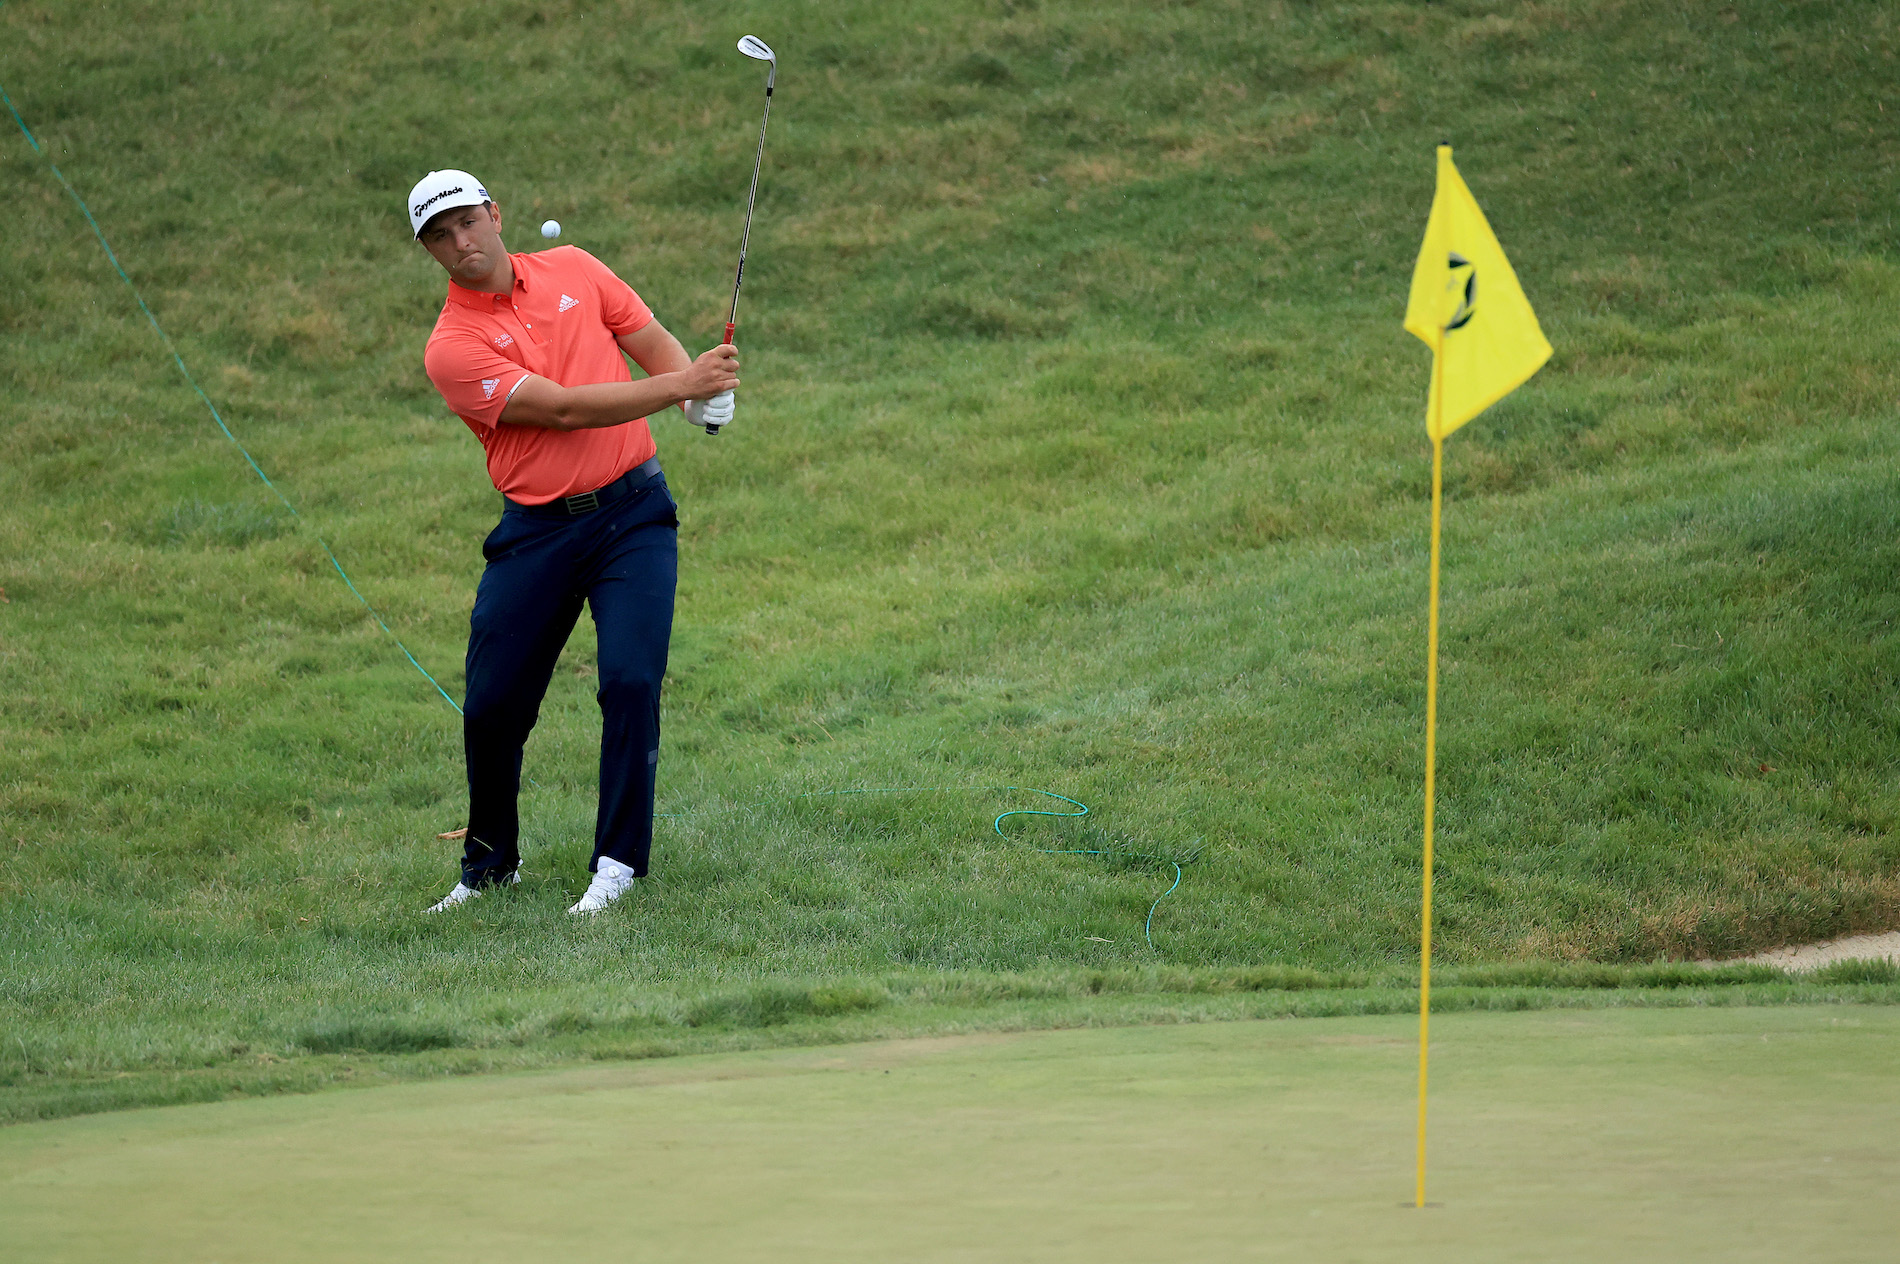 When Jon Rahm was assessed a two-stroke penalty Sunday for moving his ball a millimeter, one unlucky bettor lost $150,000.